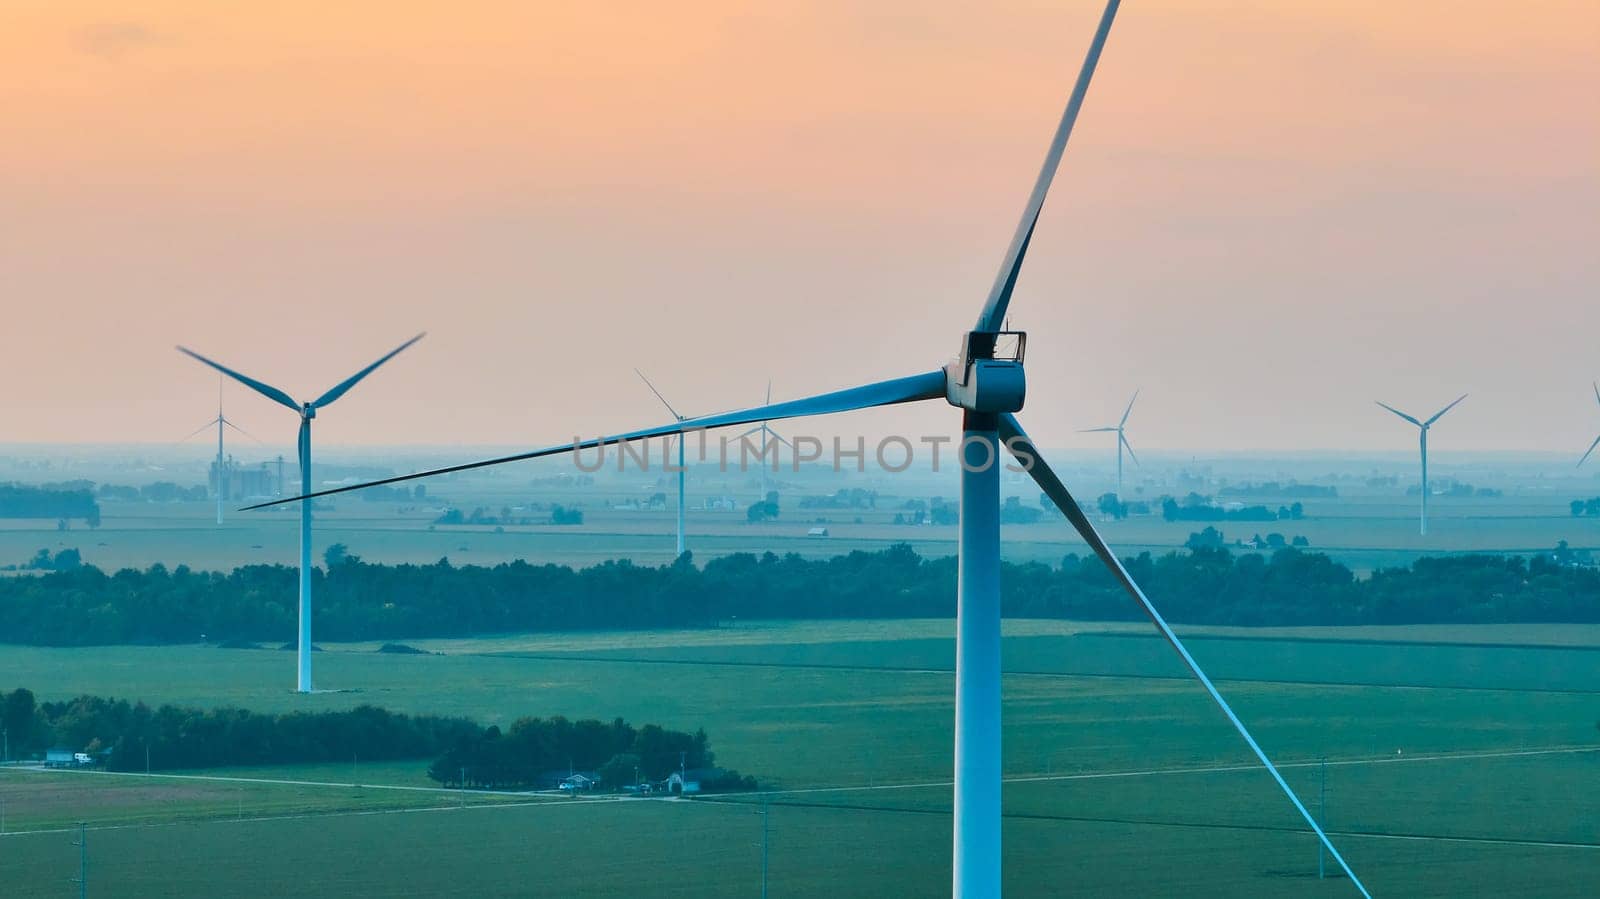 Aerial crisp wind turbine at sunset with orange sky with wind farm behind it and green fields below by njproductions